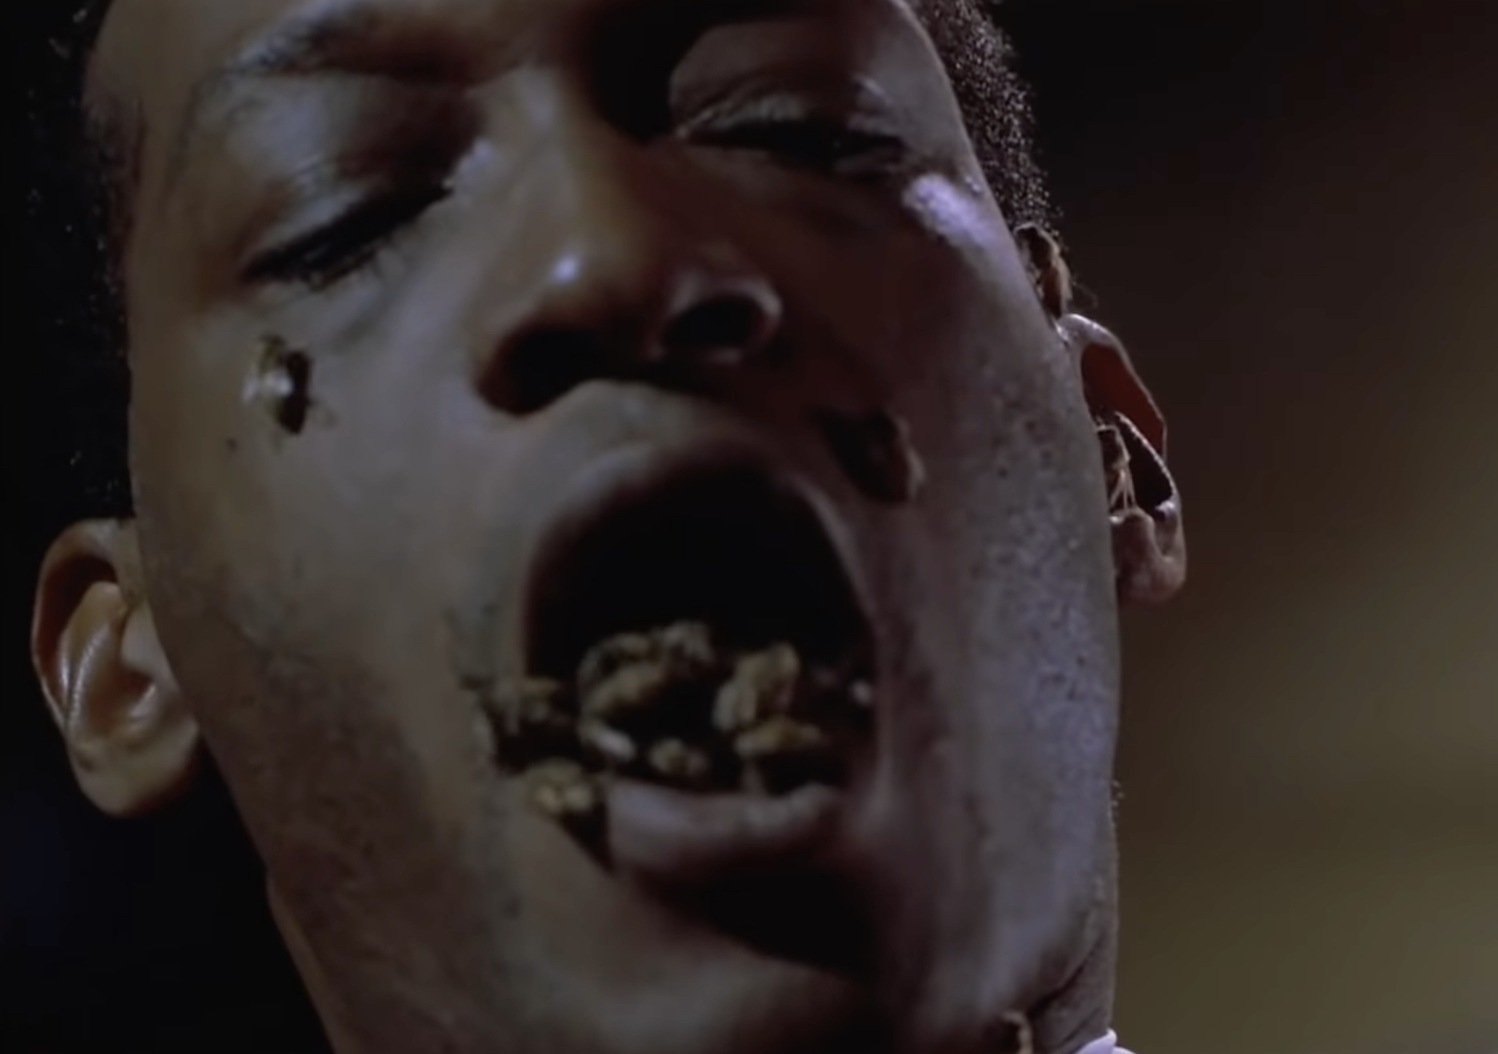 The Candyman with bees in his mouth